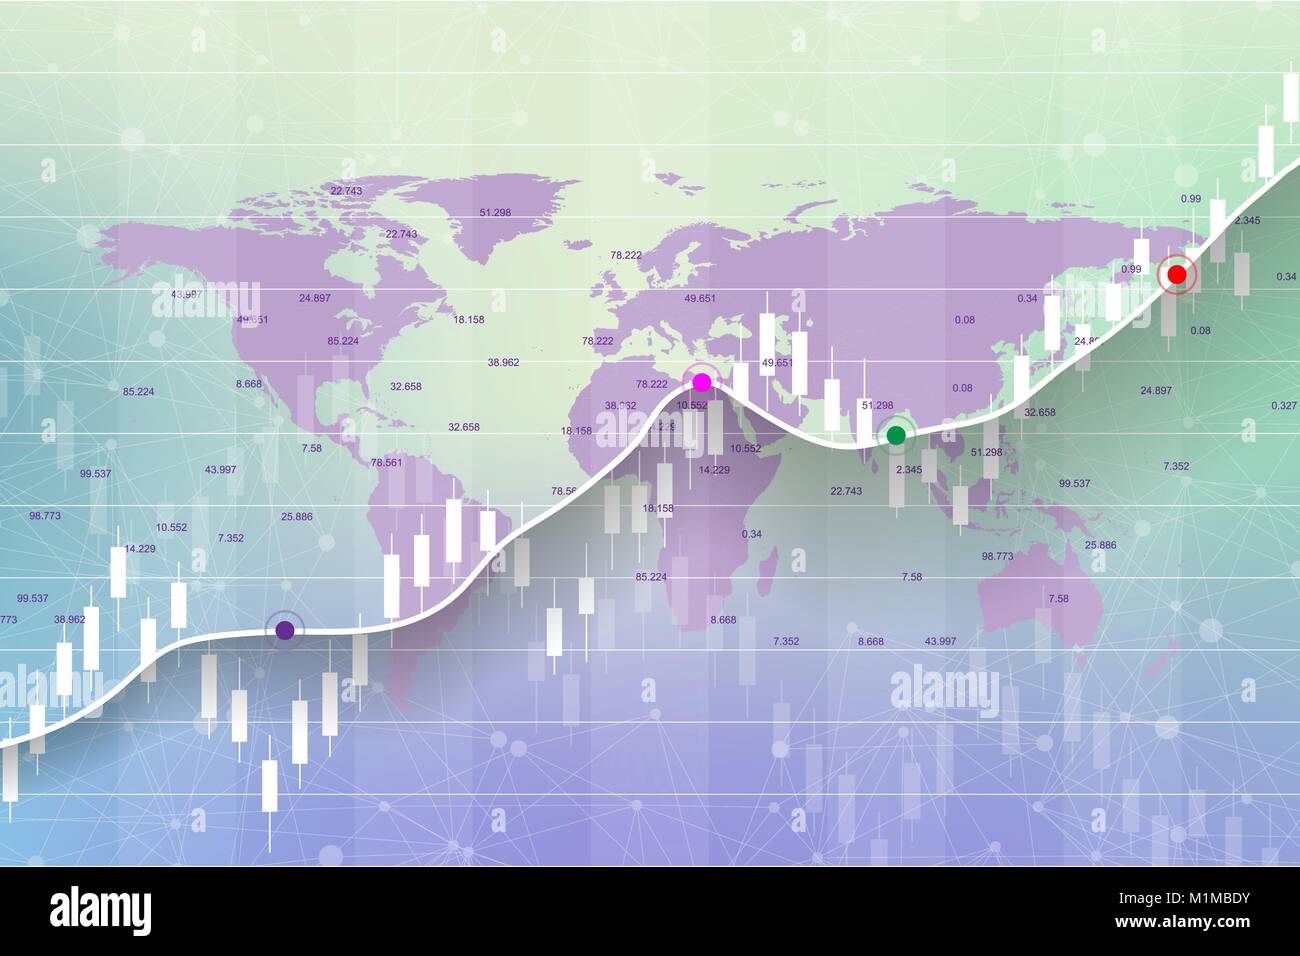 Stock market and exchange. Candle stick graph chart of stock market investment trading on World map background design. Stock market data. Bullish point, Trend of graph. Vector illustration. Stock Vector